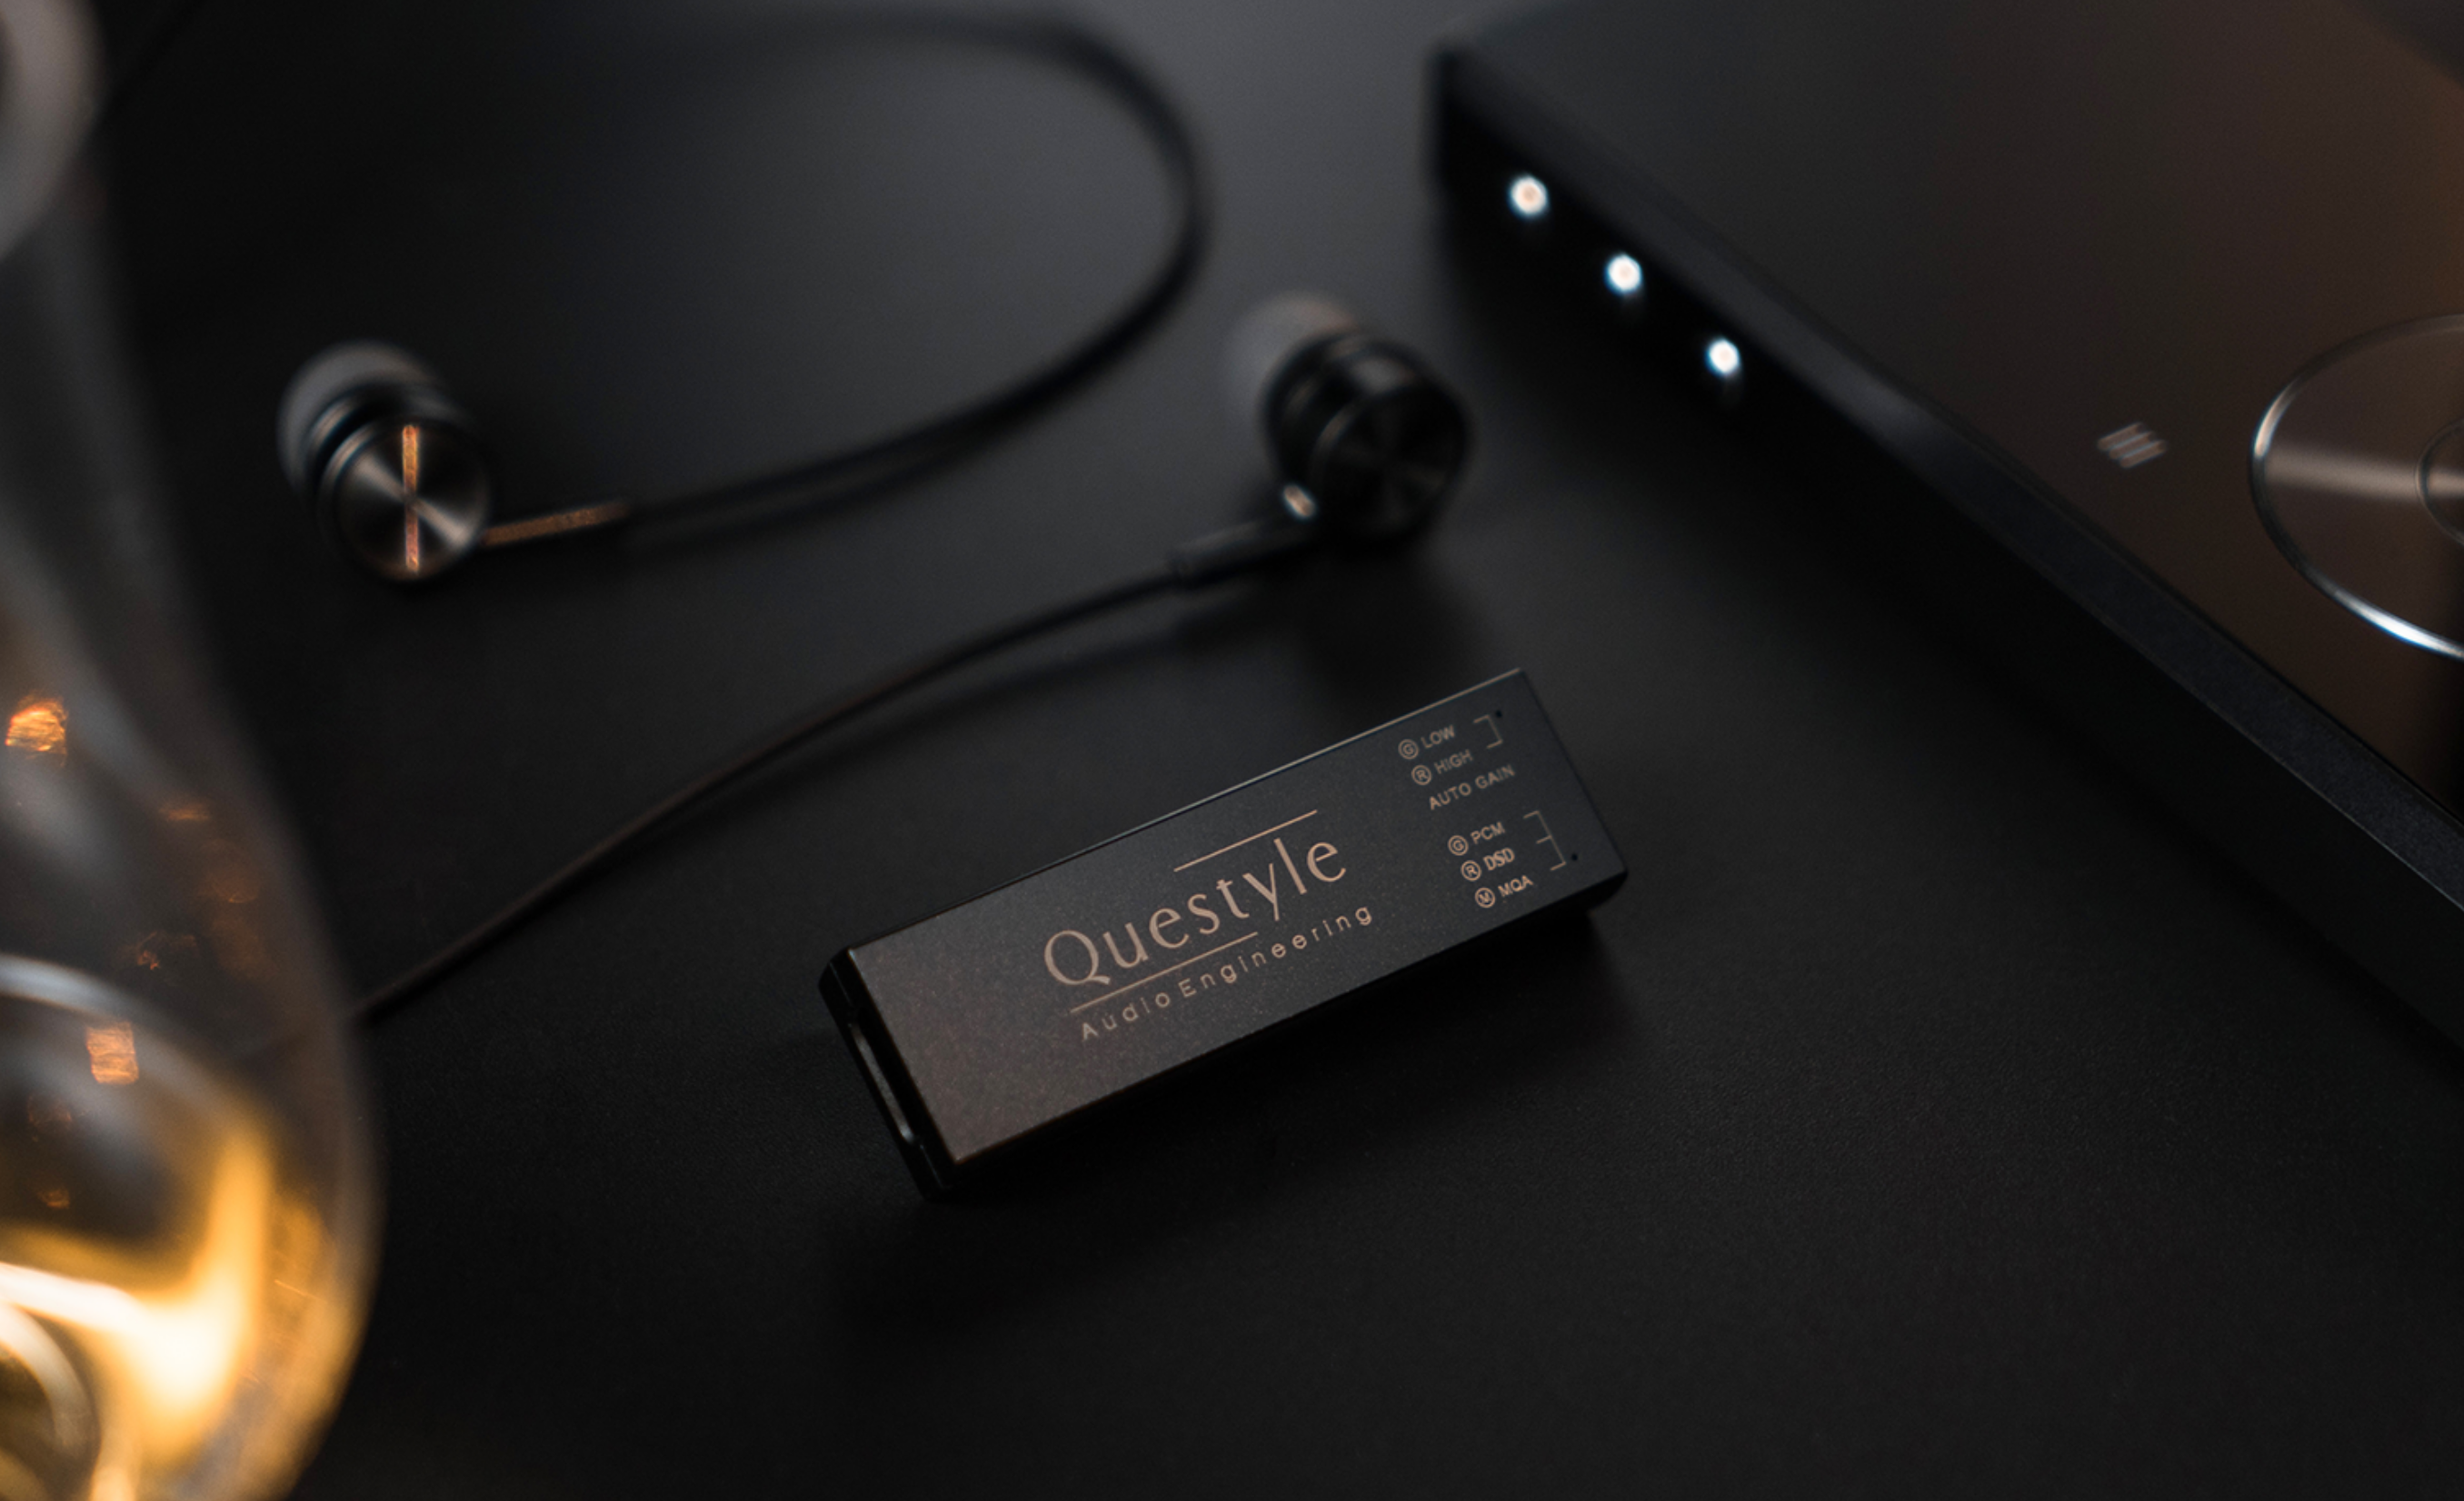 Revolutionise your music-streaming experience with this mobile amplifier